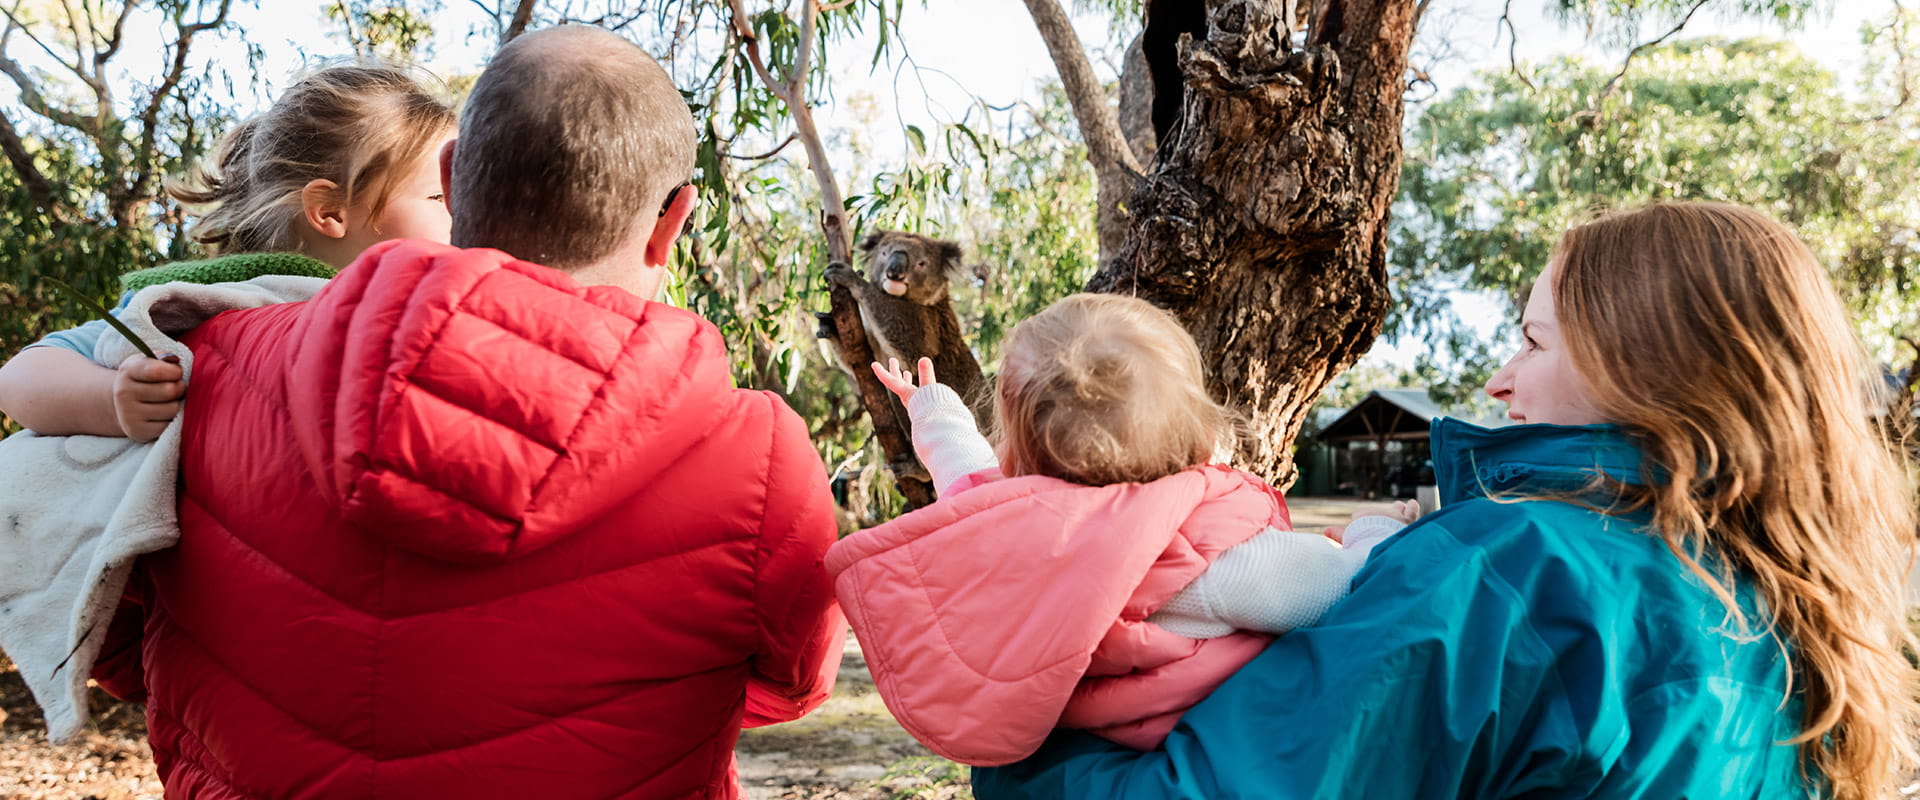 Close up of a family as they look at a koala in a tree in the background.